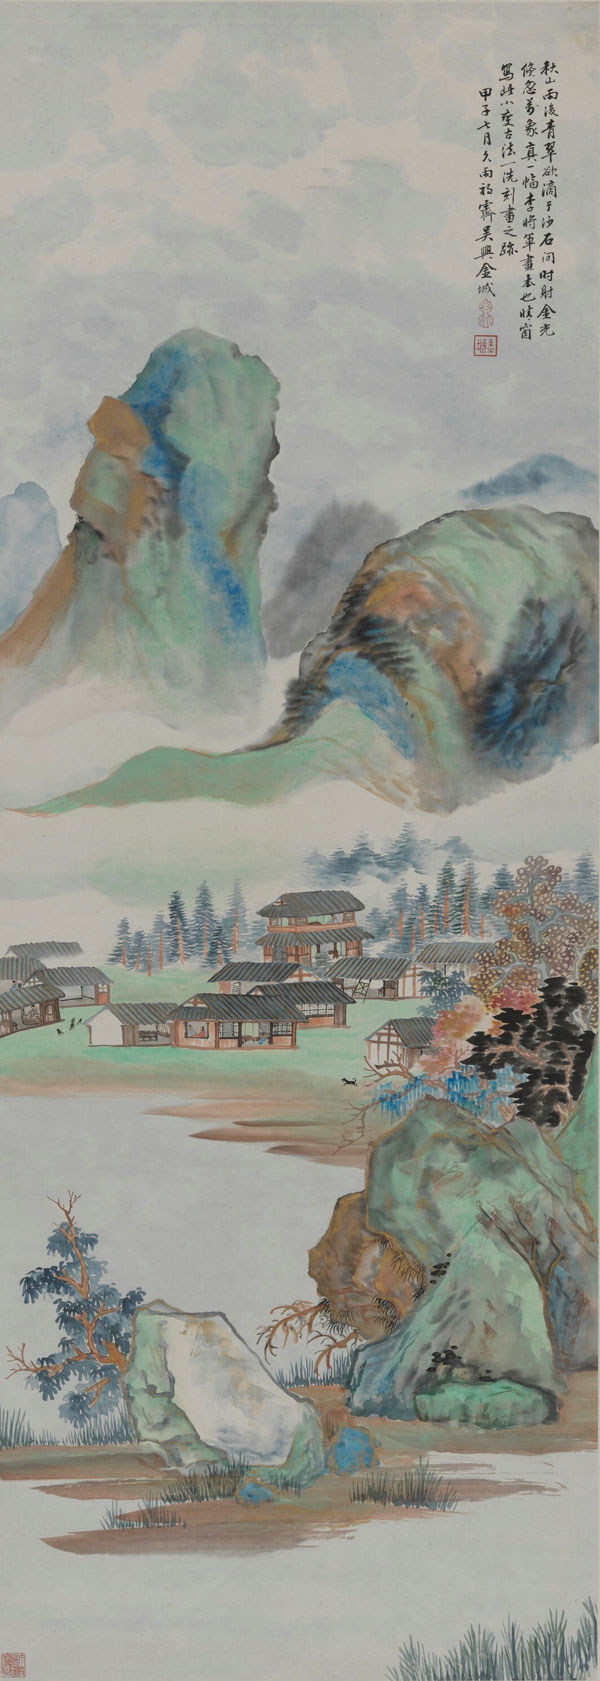 Art works of National Art Museum of China(2)